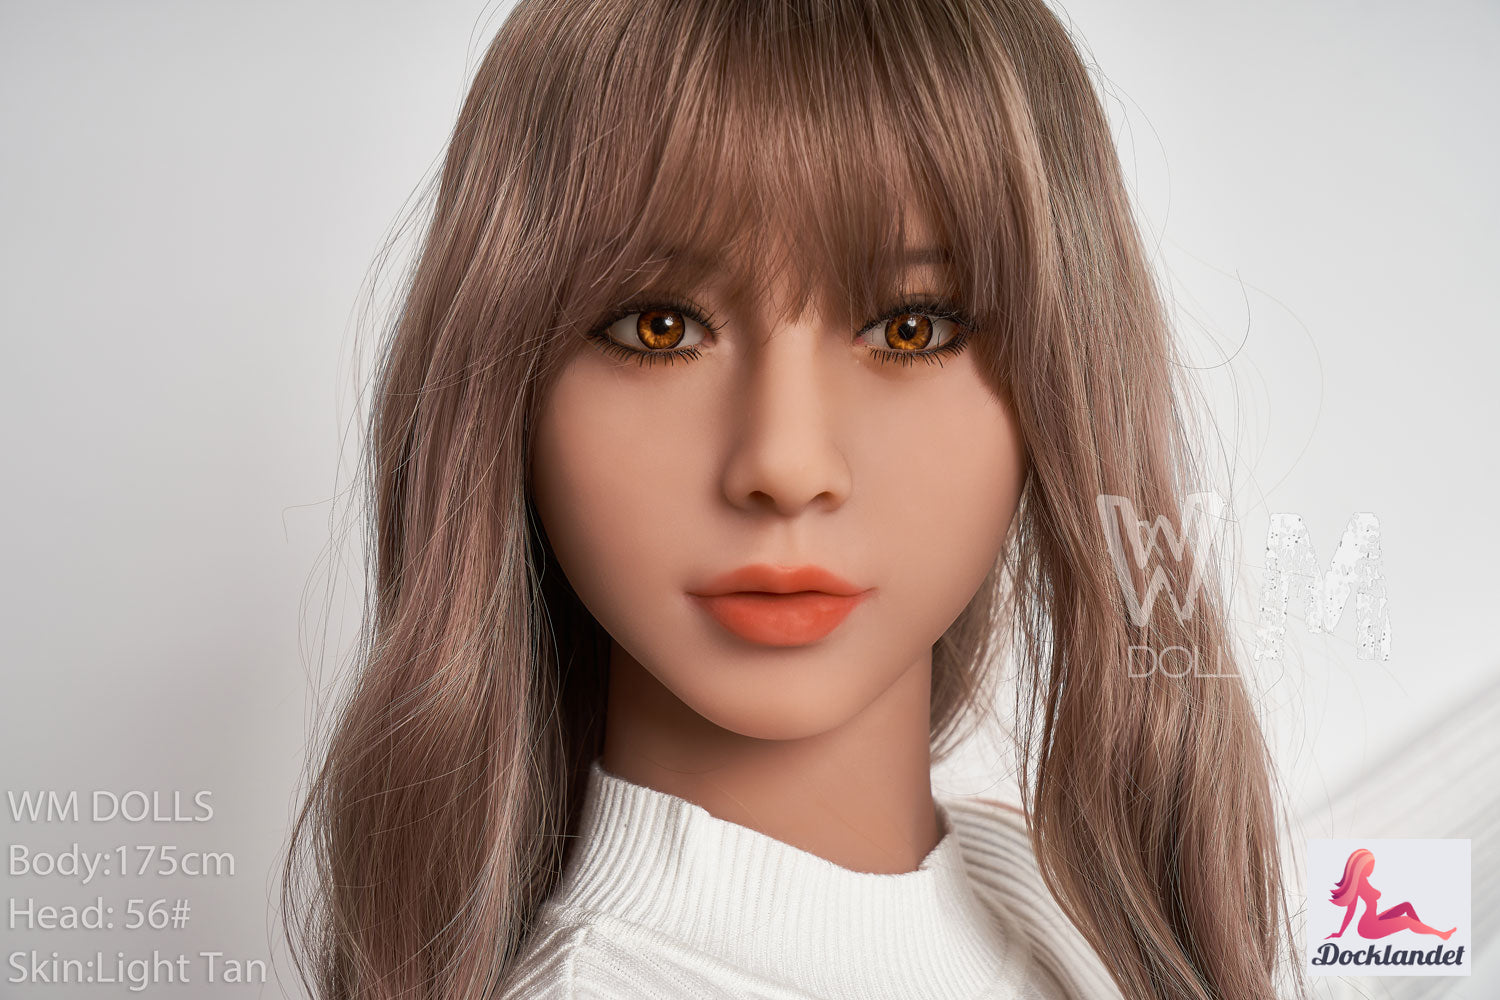 WM-Doll 175 cm G-cup TPE. TPE and Silicone Doll from WM-Doll. Also referred to as Liquid Silicone Rubber (LSR), silicone is a class of polymers made up of repeating units of siloxane. It’s rubbery and soft to touch, which has made silicone a manufacturers’ favorite for many years. Moreover, silicone is heat resistant which opens your world to new possibilities. For instance, unlike TPE sex dolls, you can sterilize silicone by boiling, making silicone sex dolls easier to clean and maintain. Sex dolls made of silicone are more durable, easier to clean and the dolls can be made to look extremely realistic.